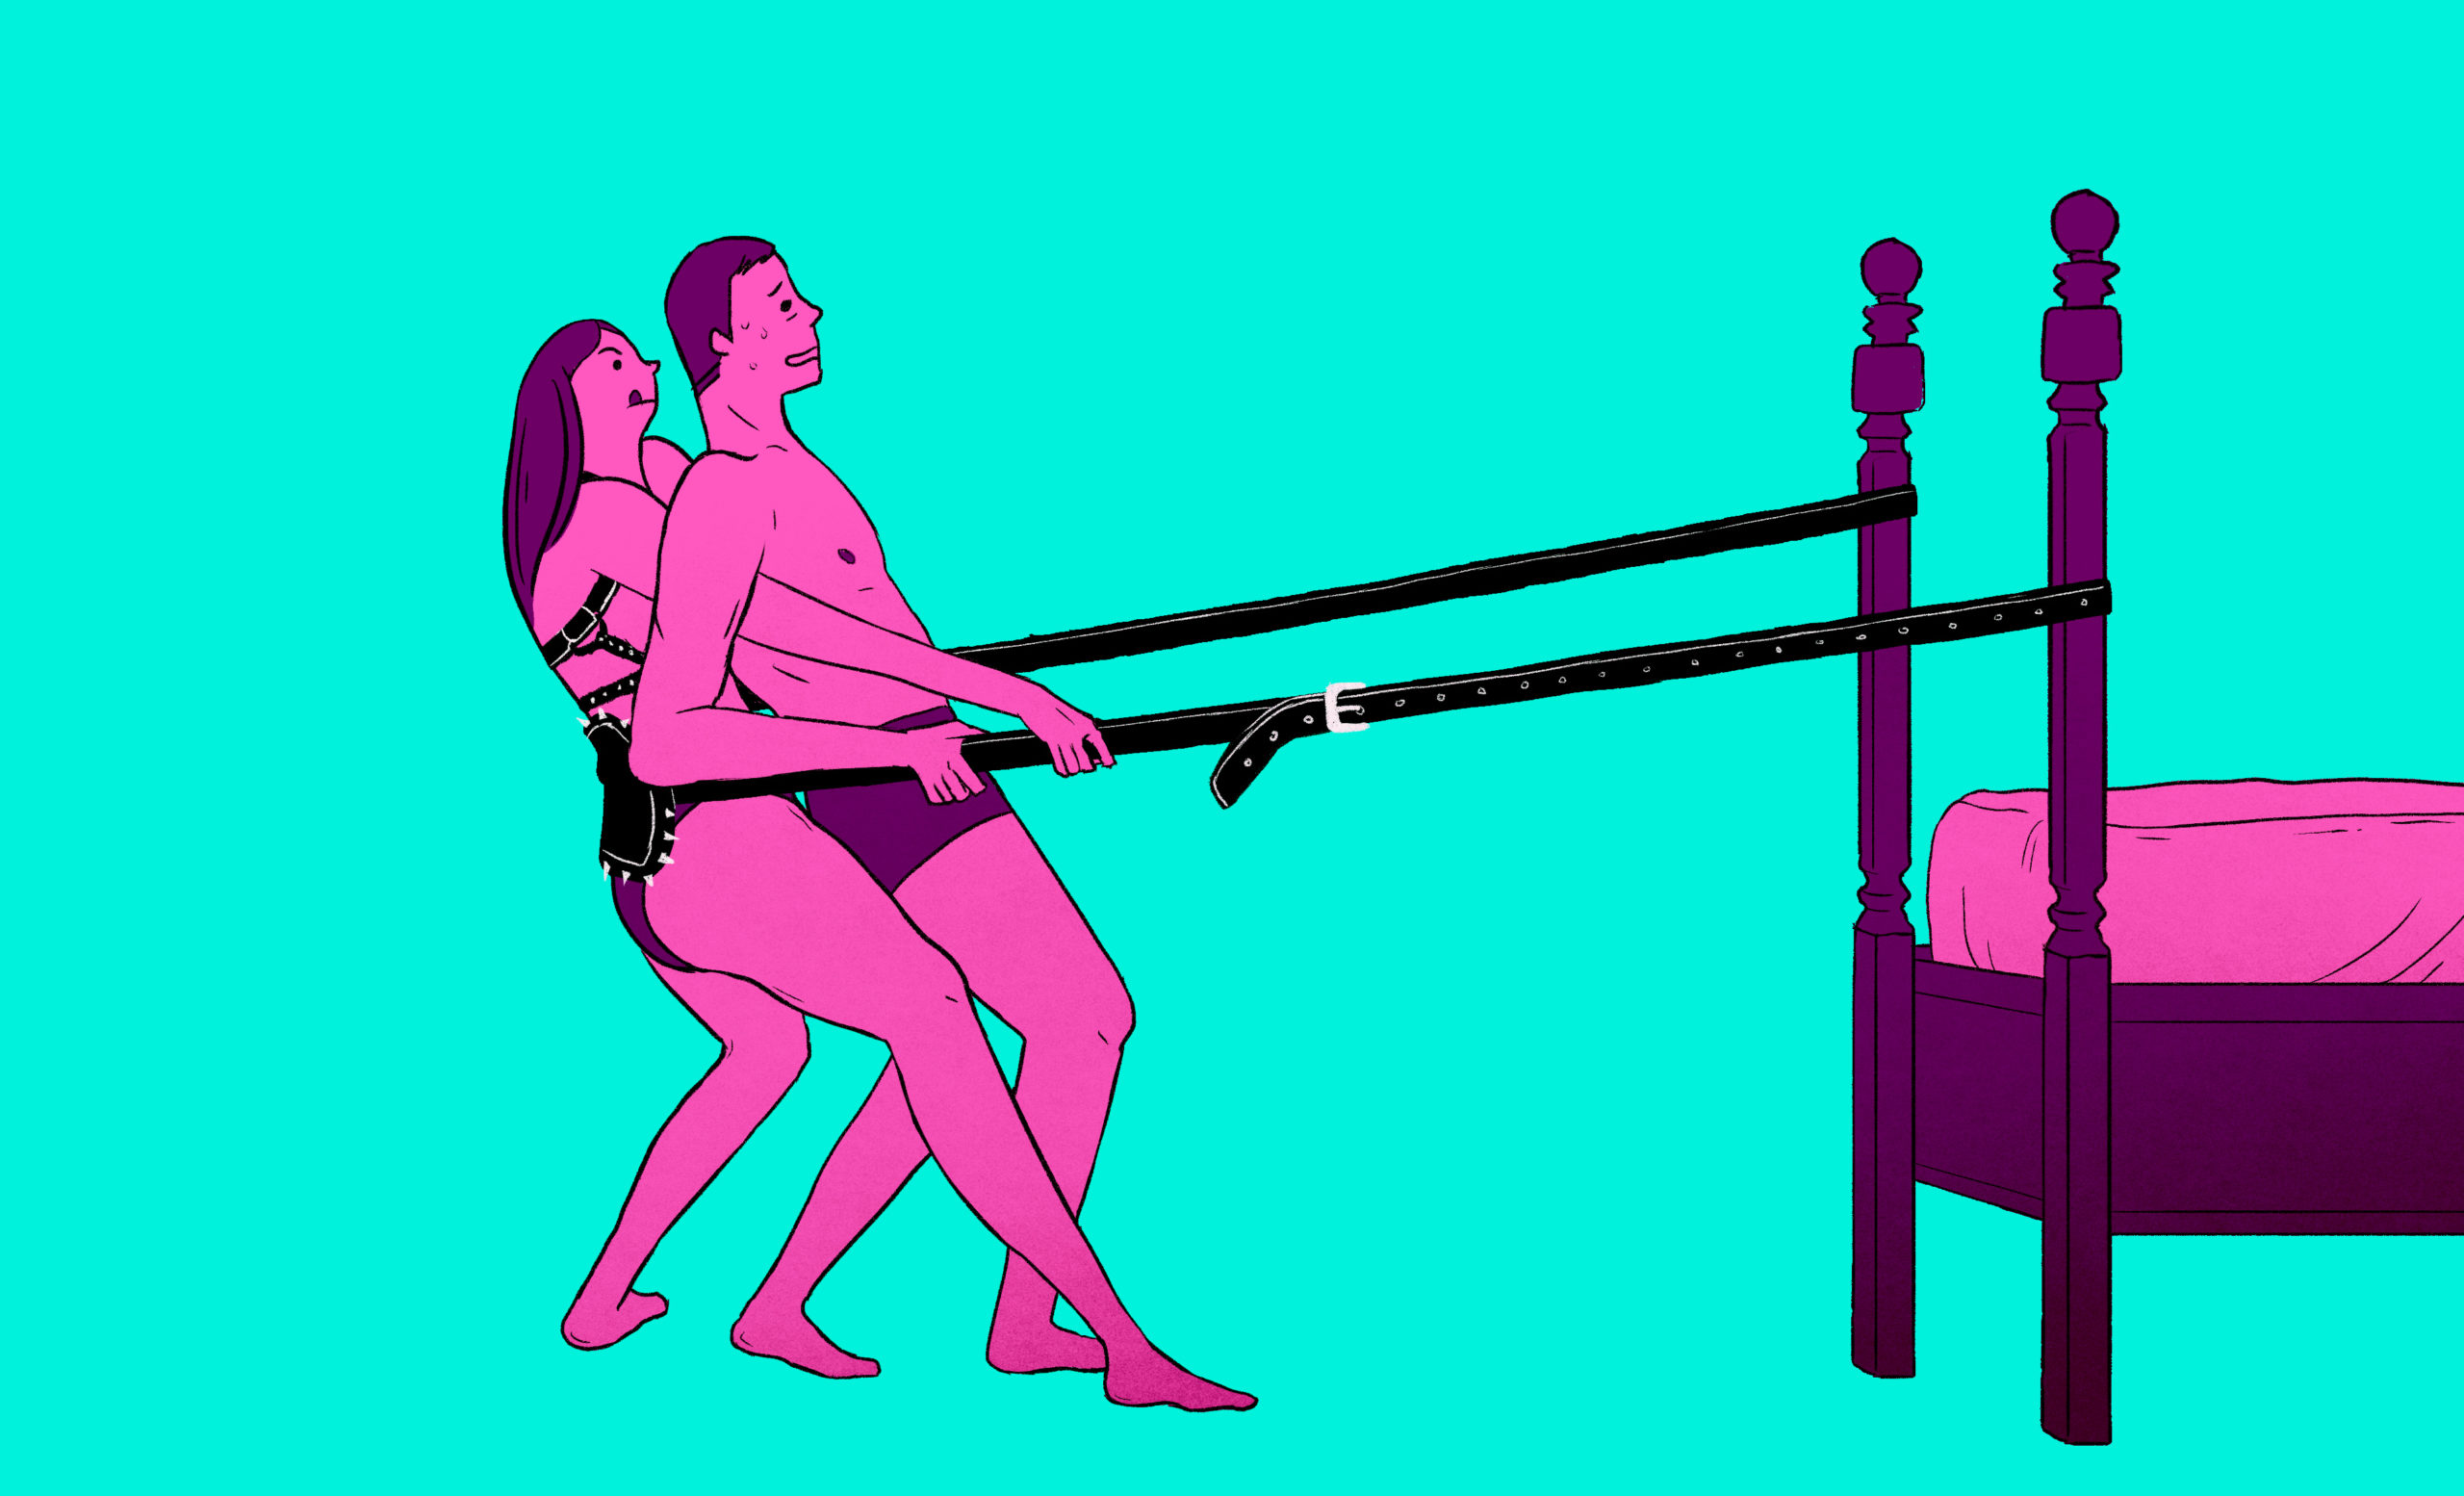 How To Try Out A Sexual Fantasy, Even If You're Not Sure You're Going To Like It